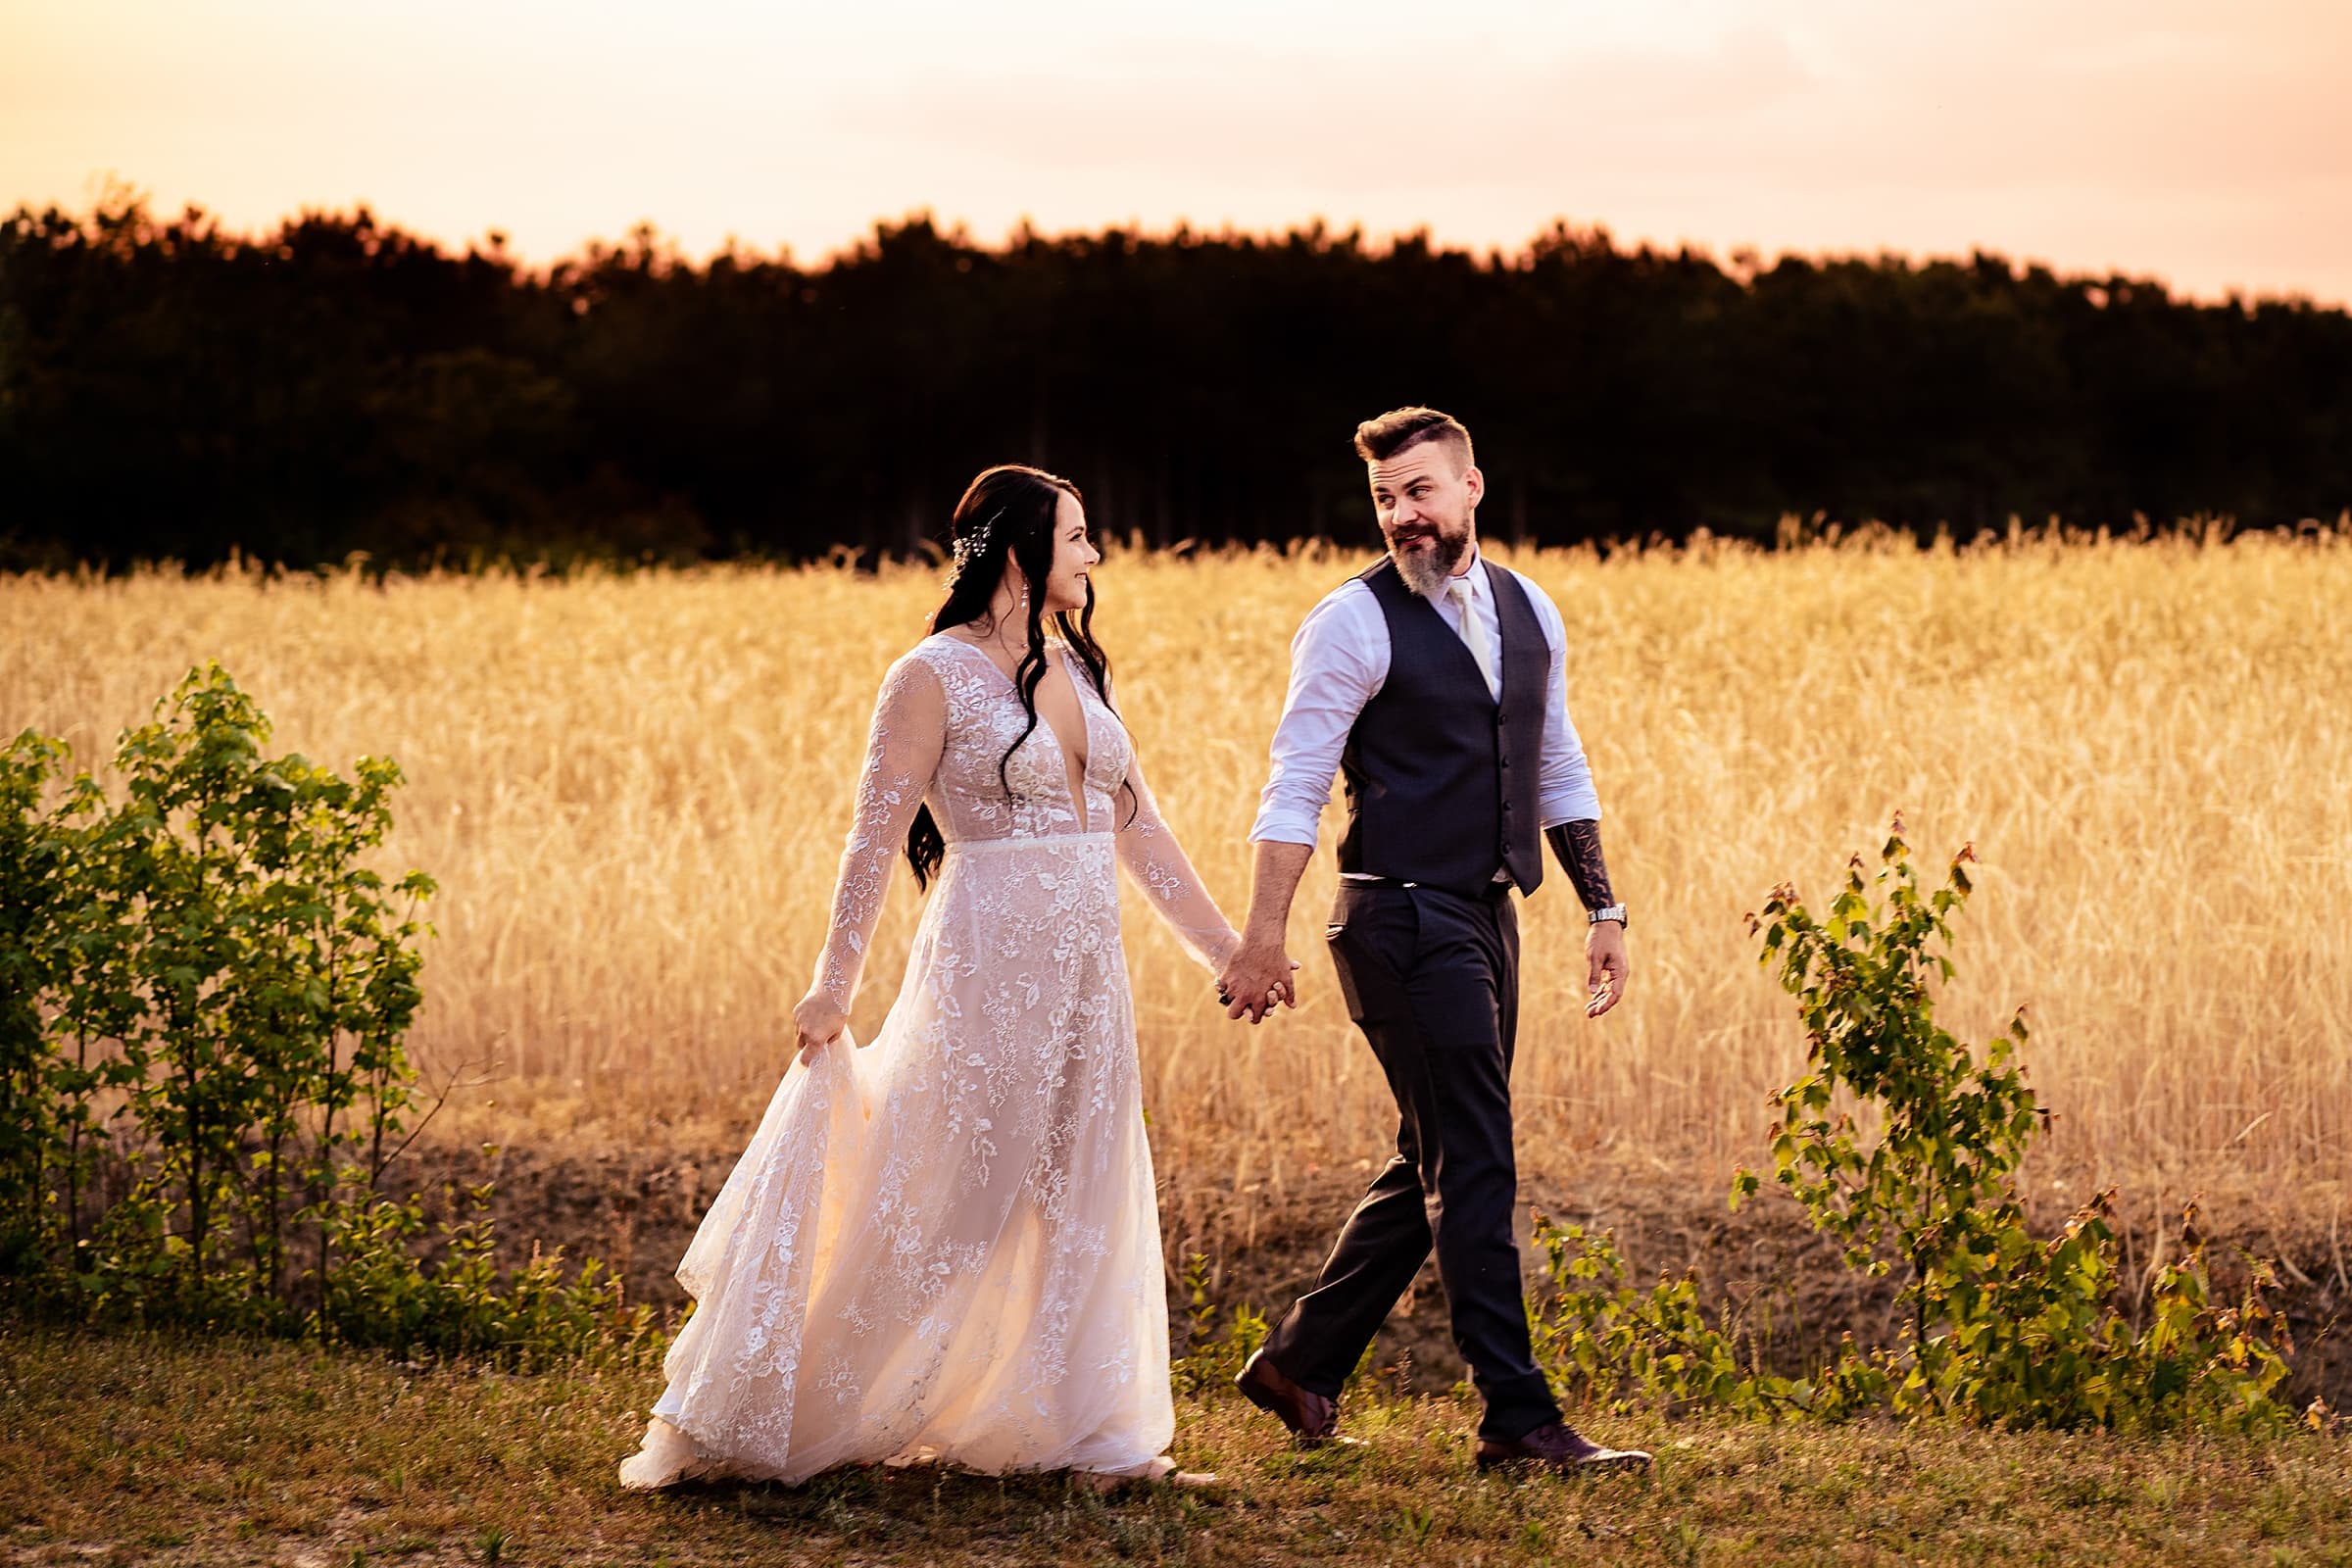 newlywed happiness during portraits immediately after the ceremony at this vineyard wedding